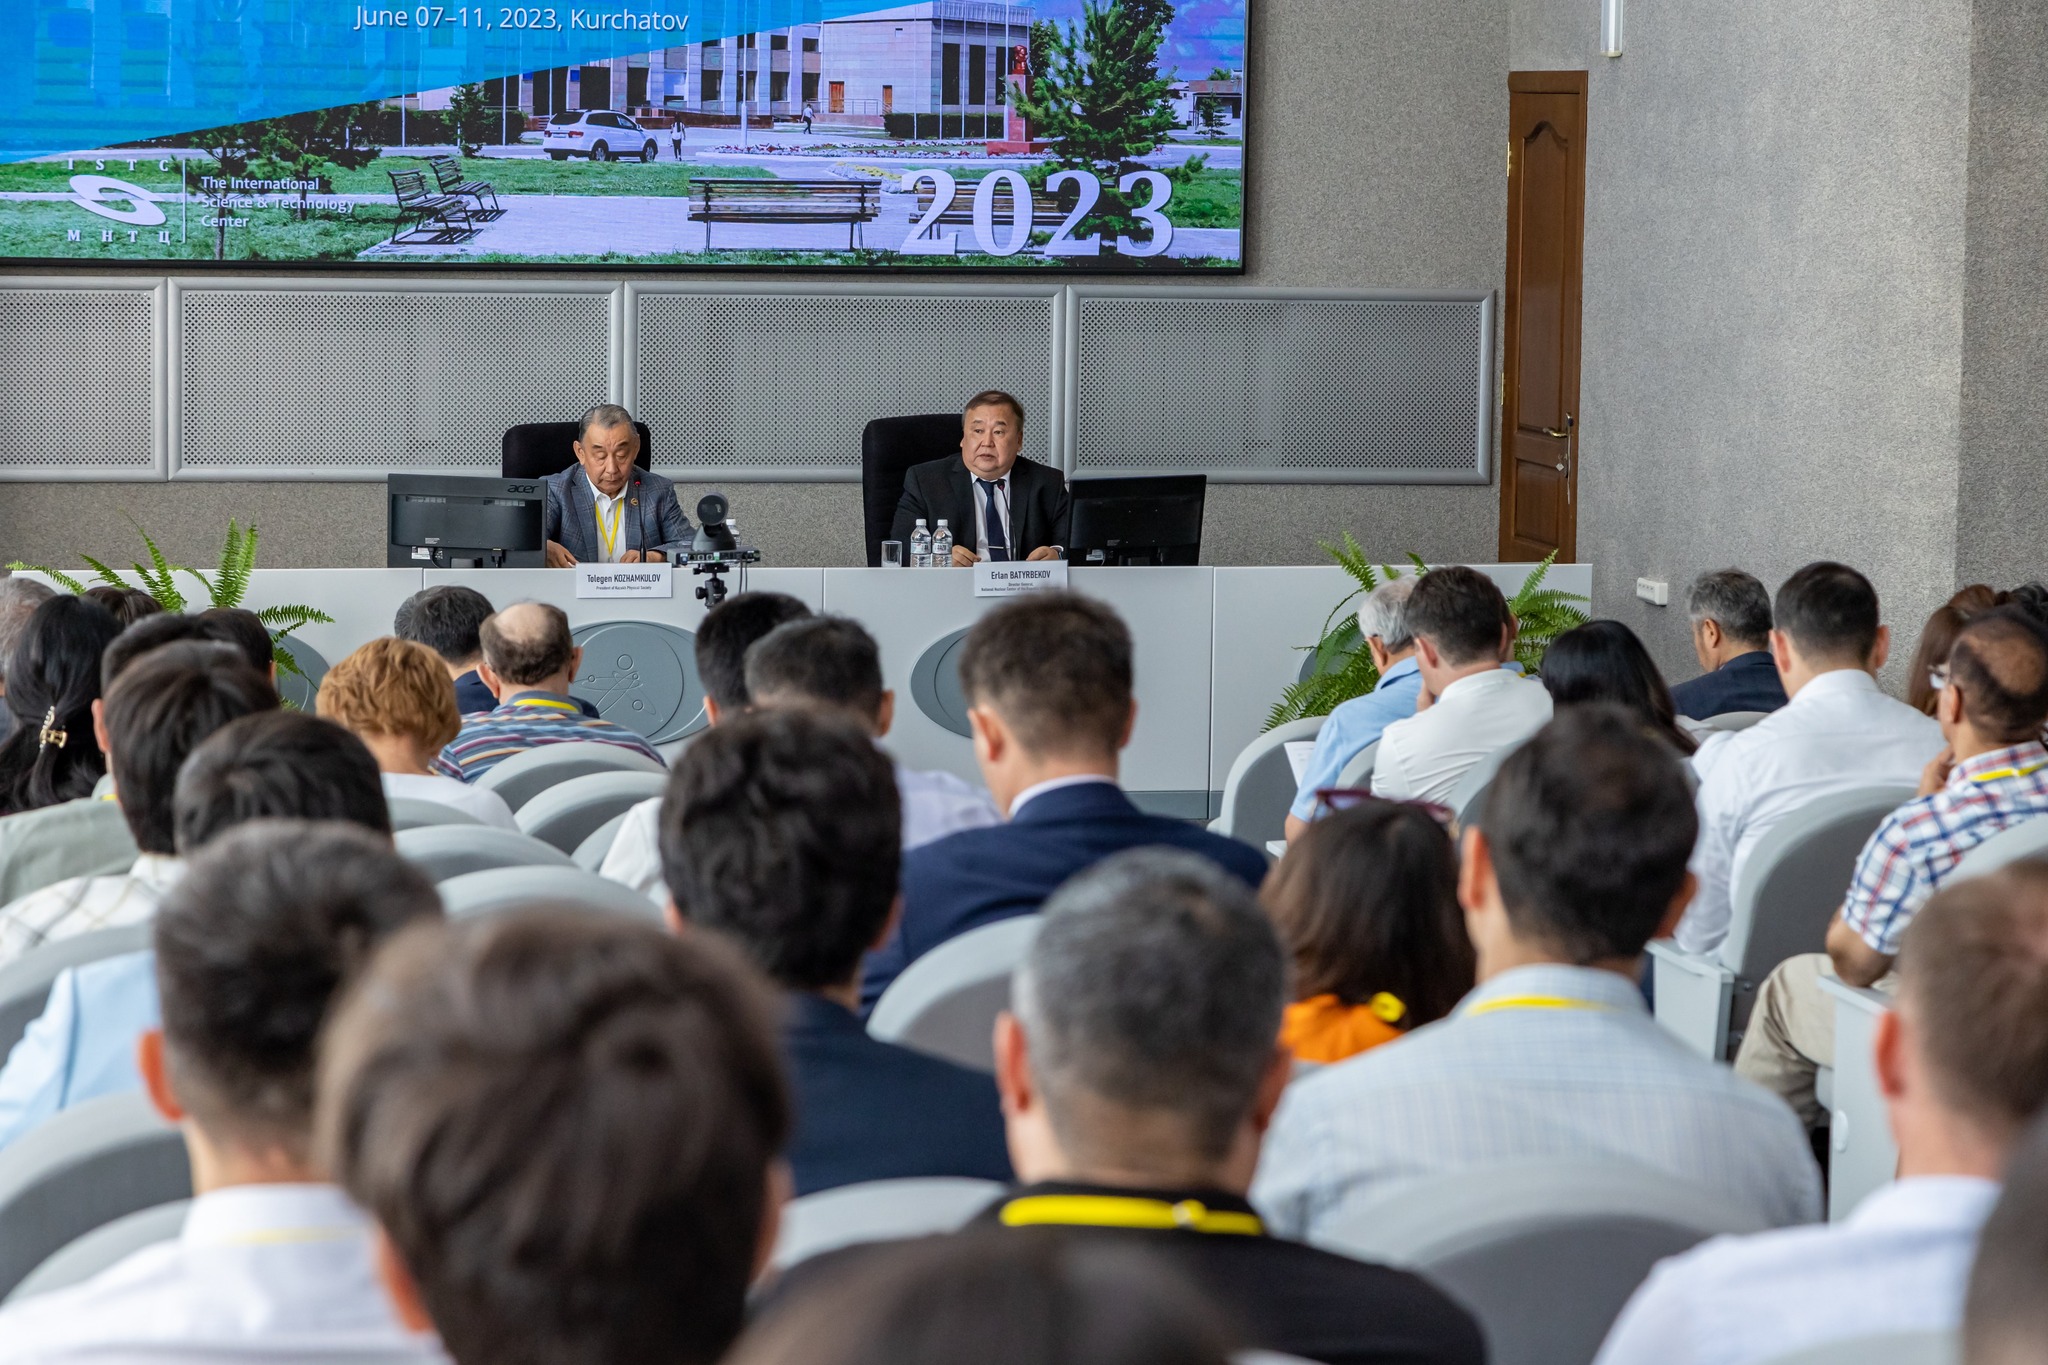 ISTC supported the third Annual Meeting of the Kazakhstan Physical Society